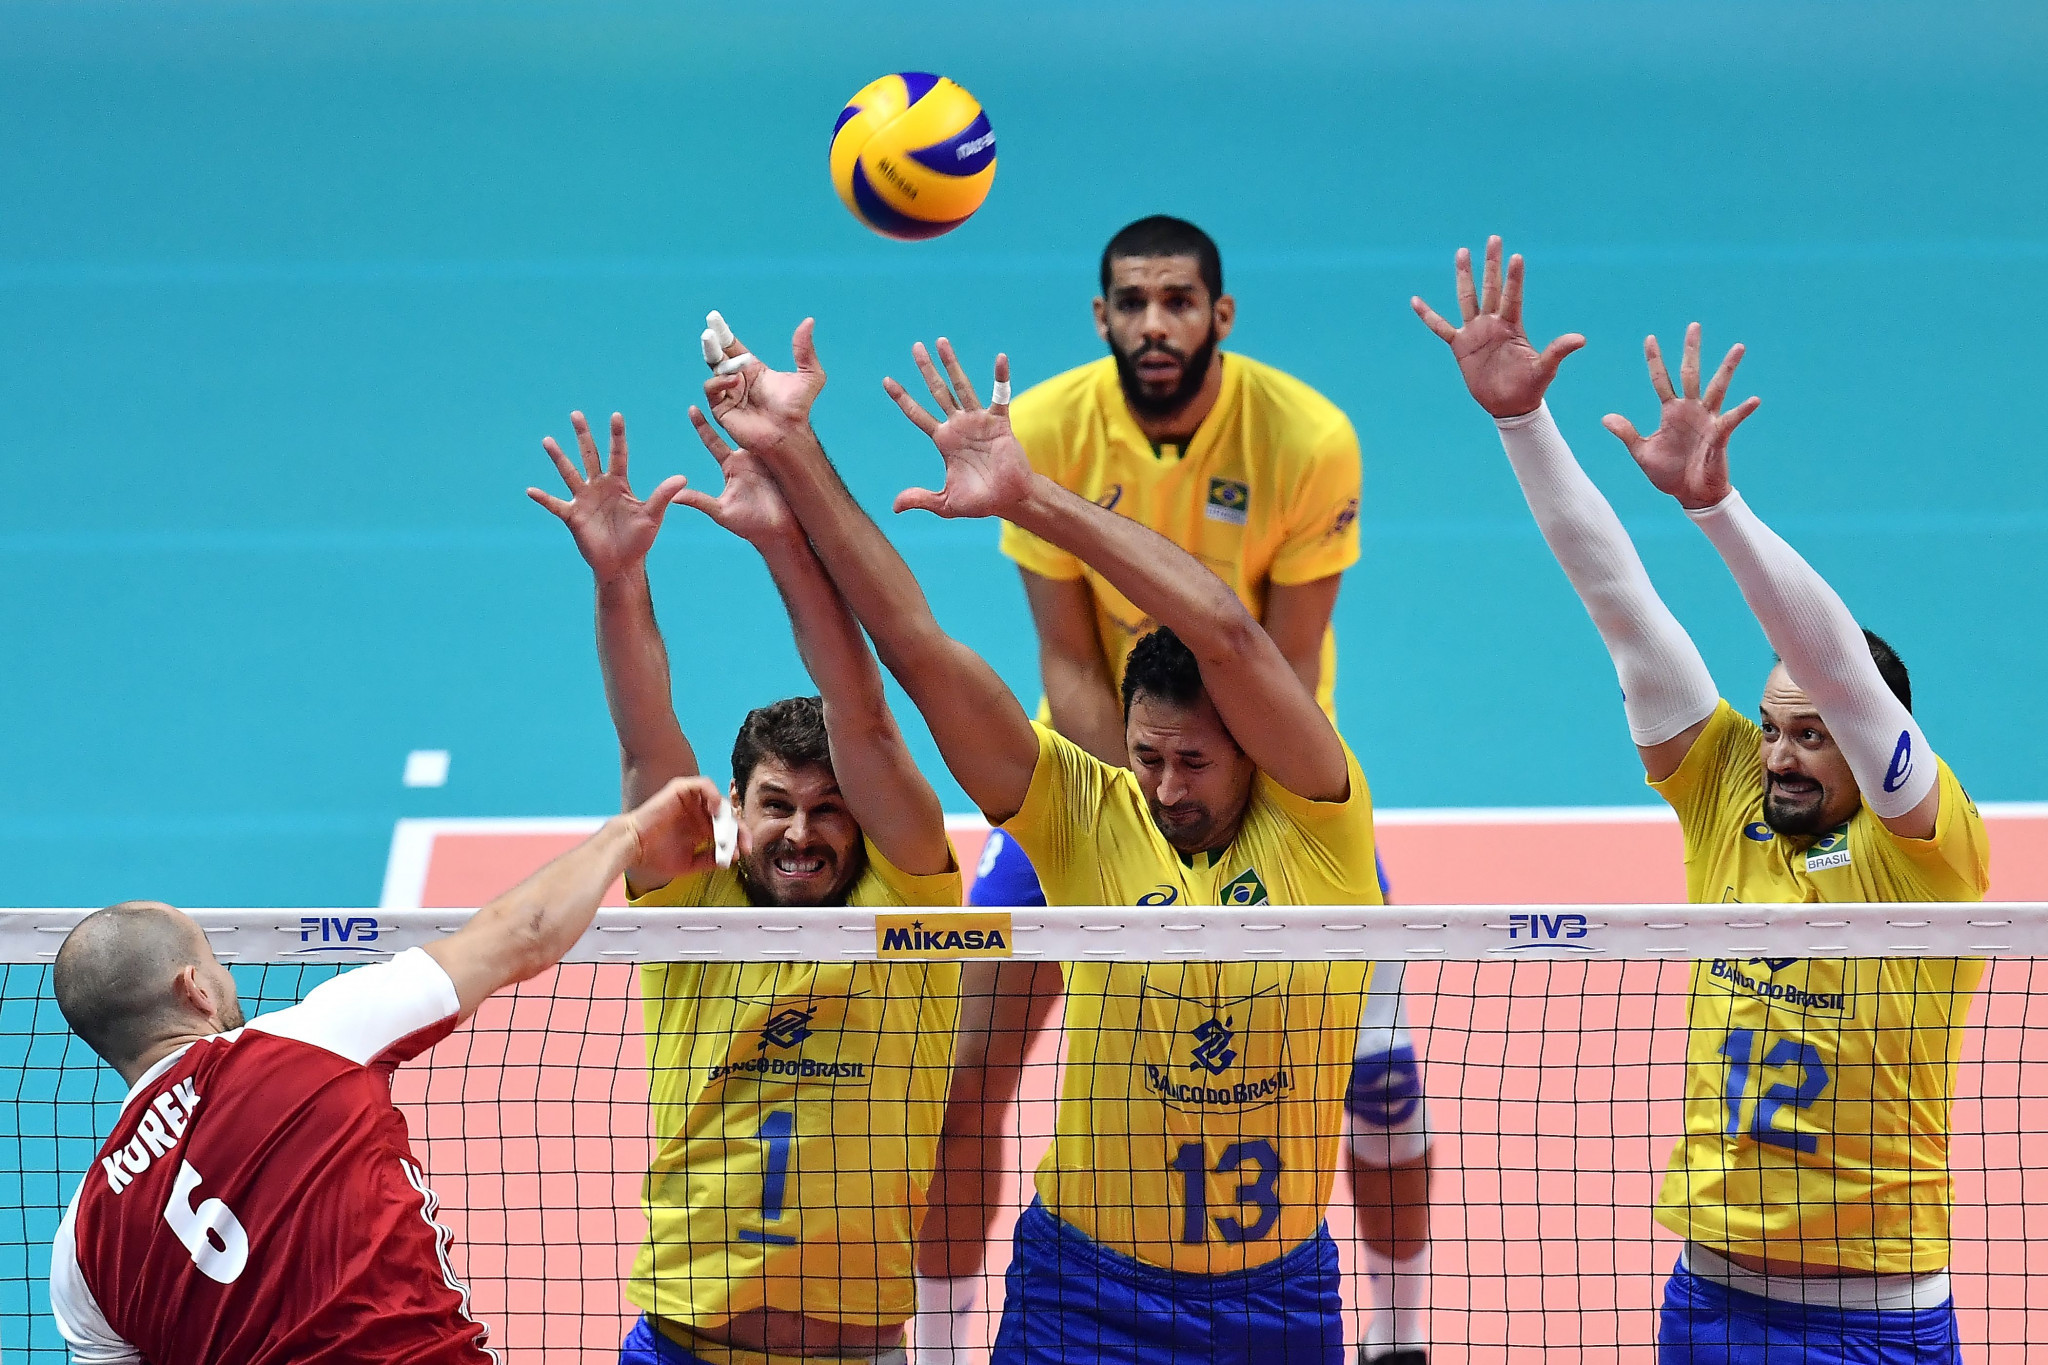 Poland beat Brazil in last year's Men's World Championship final at Pala Alpitour ©Getty Images